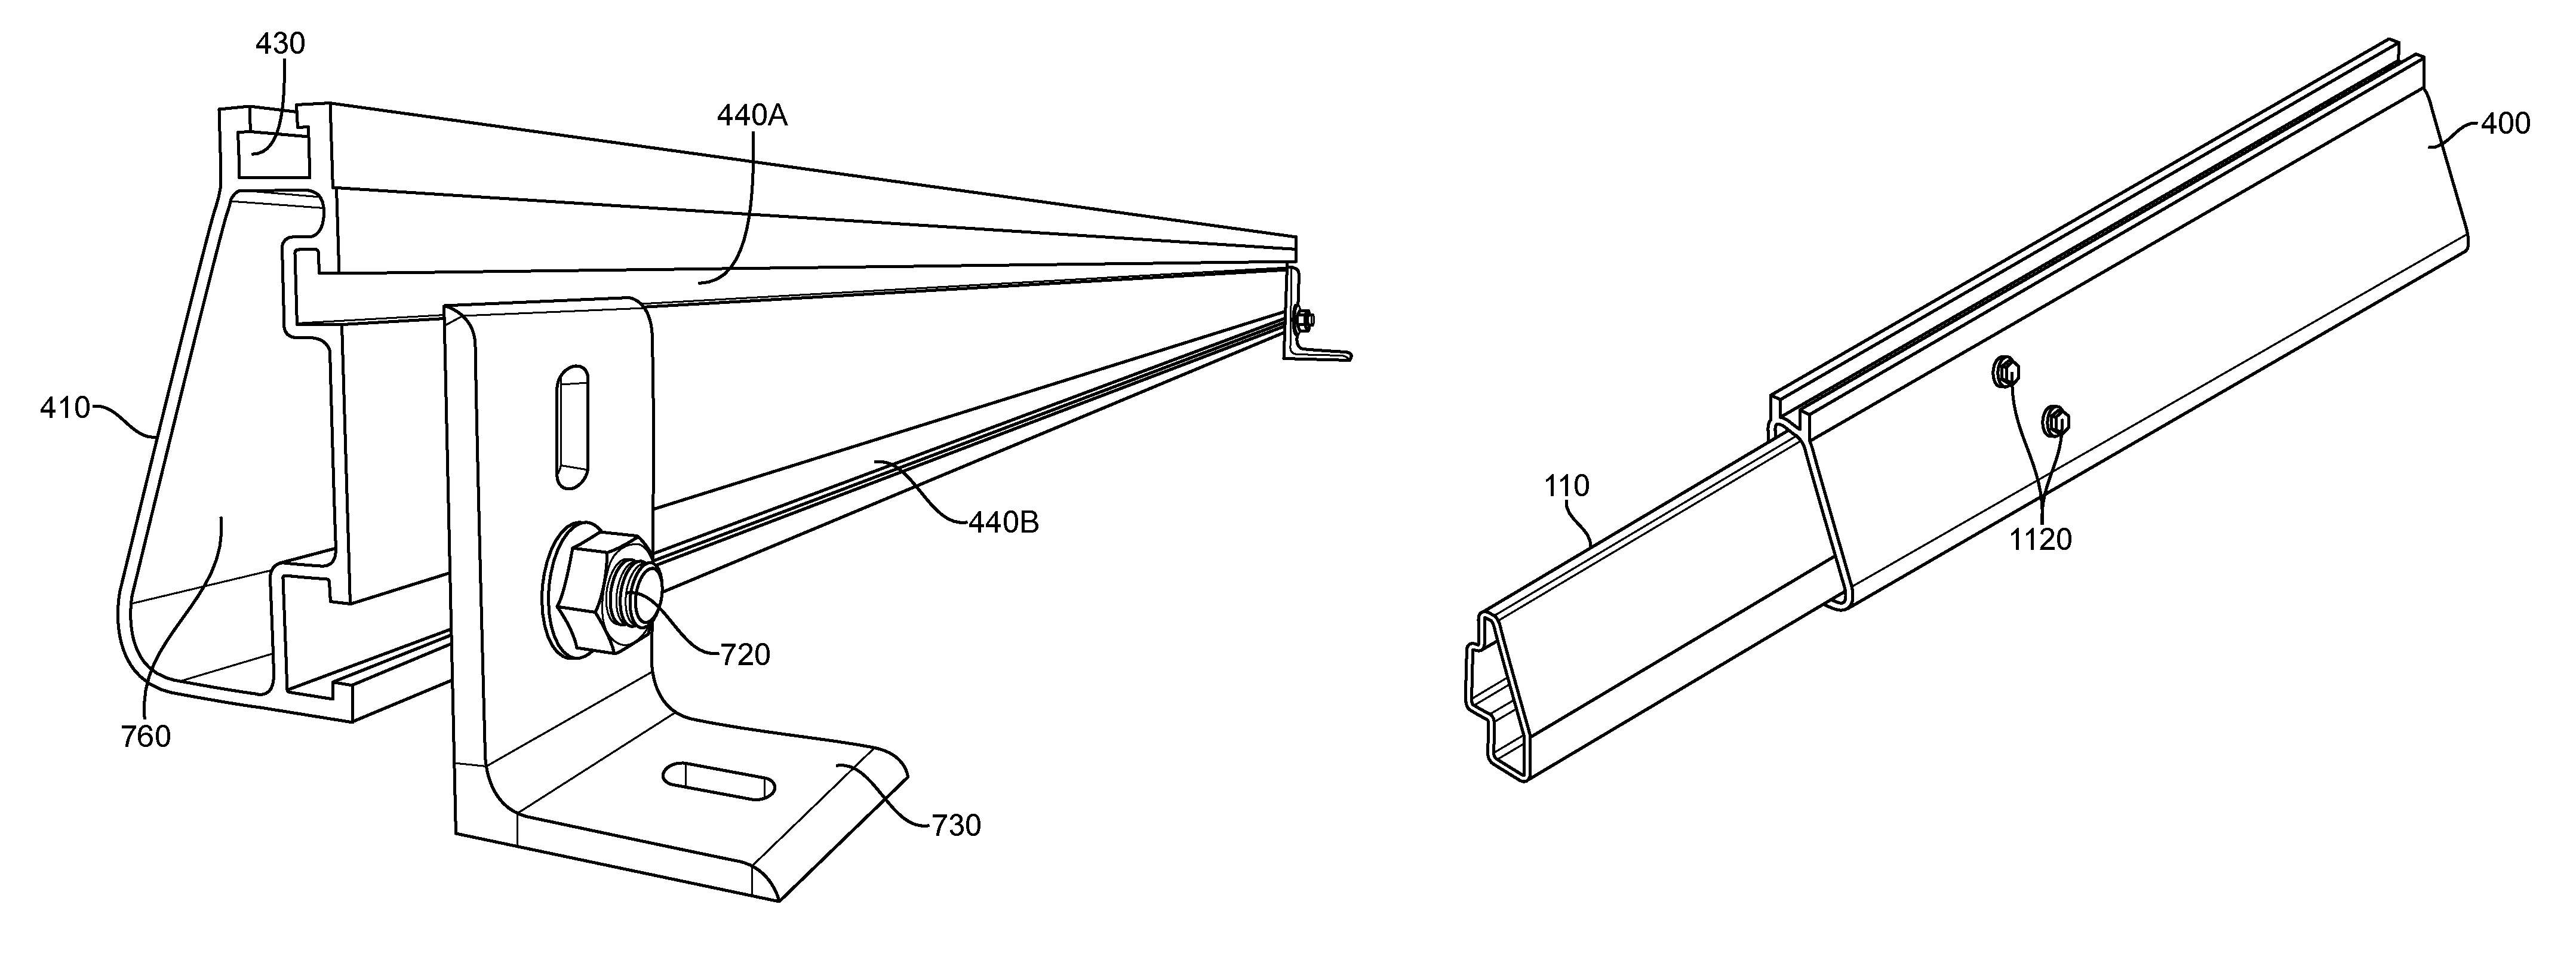 Systems and methods for splicing solar panel racks